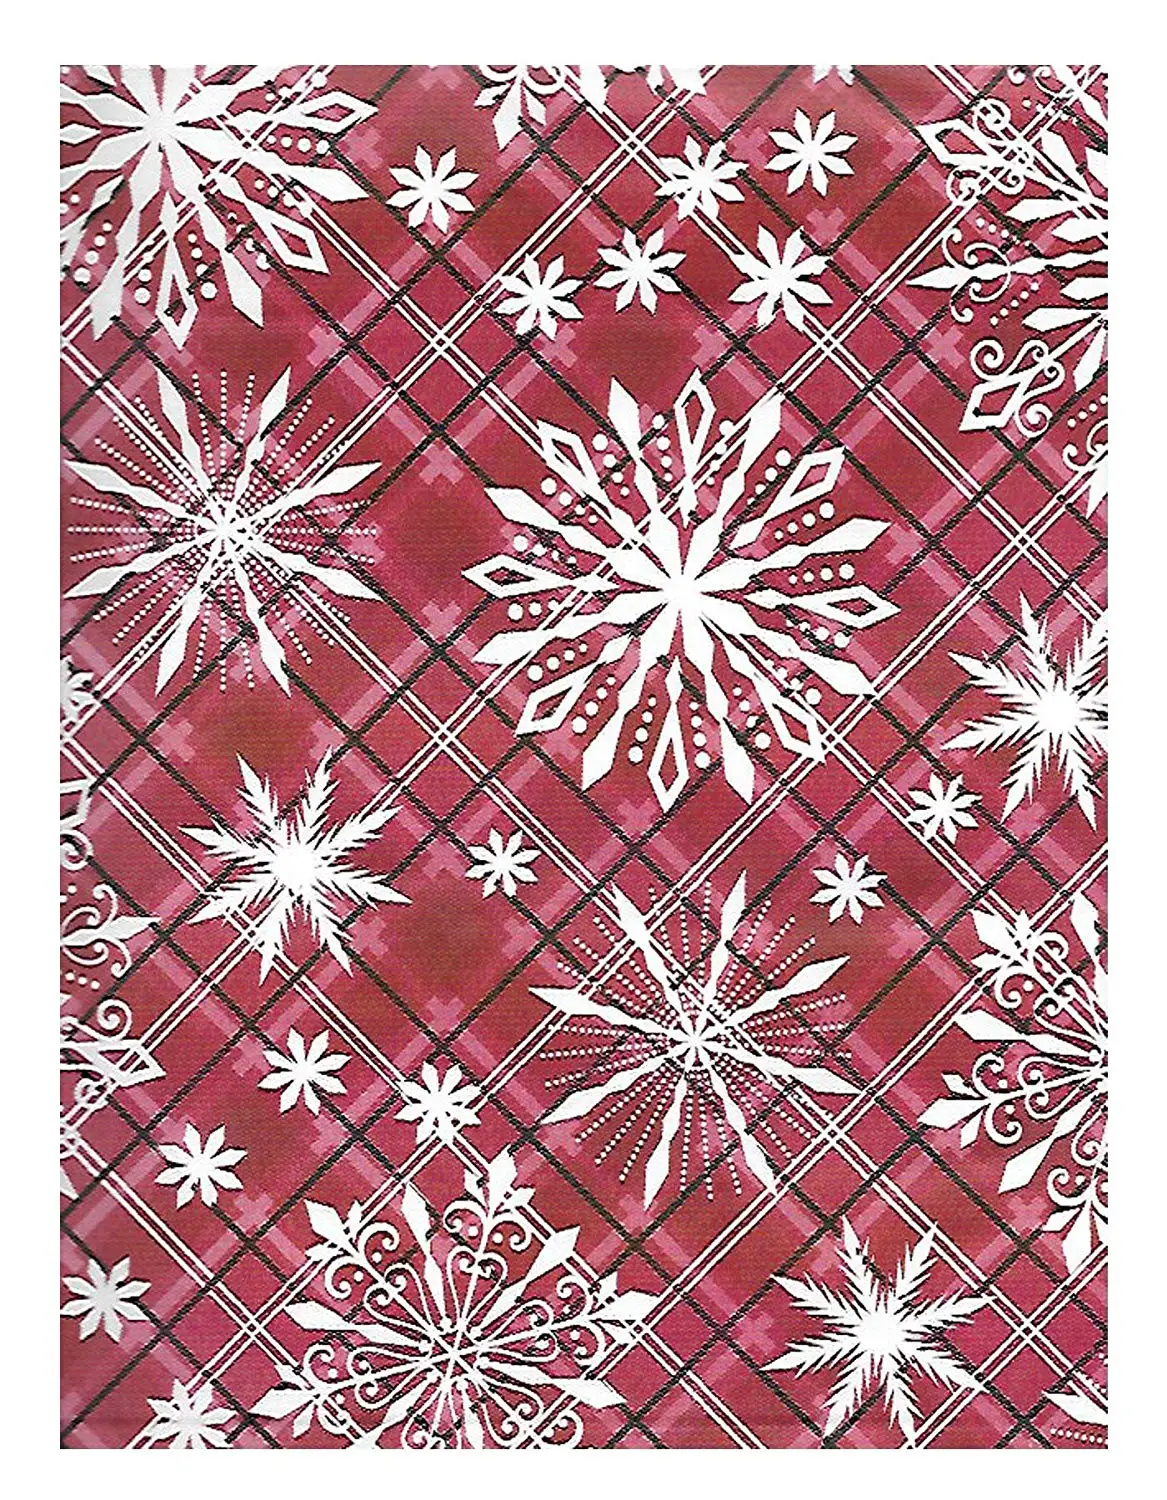 Christmas Backed Table Cloth Silver Cloth With Snowflake Design 52 x 70